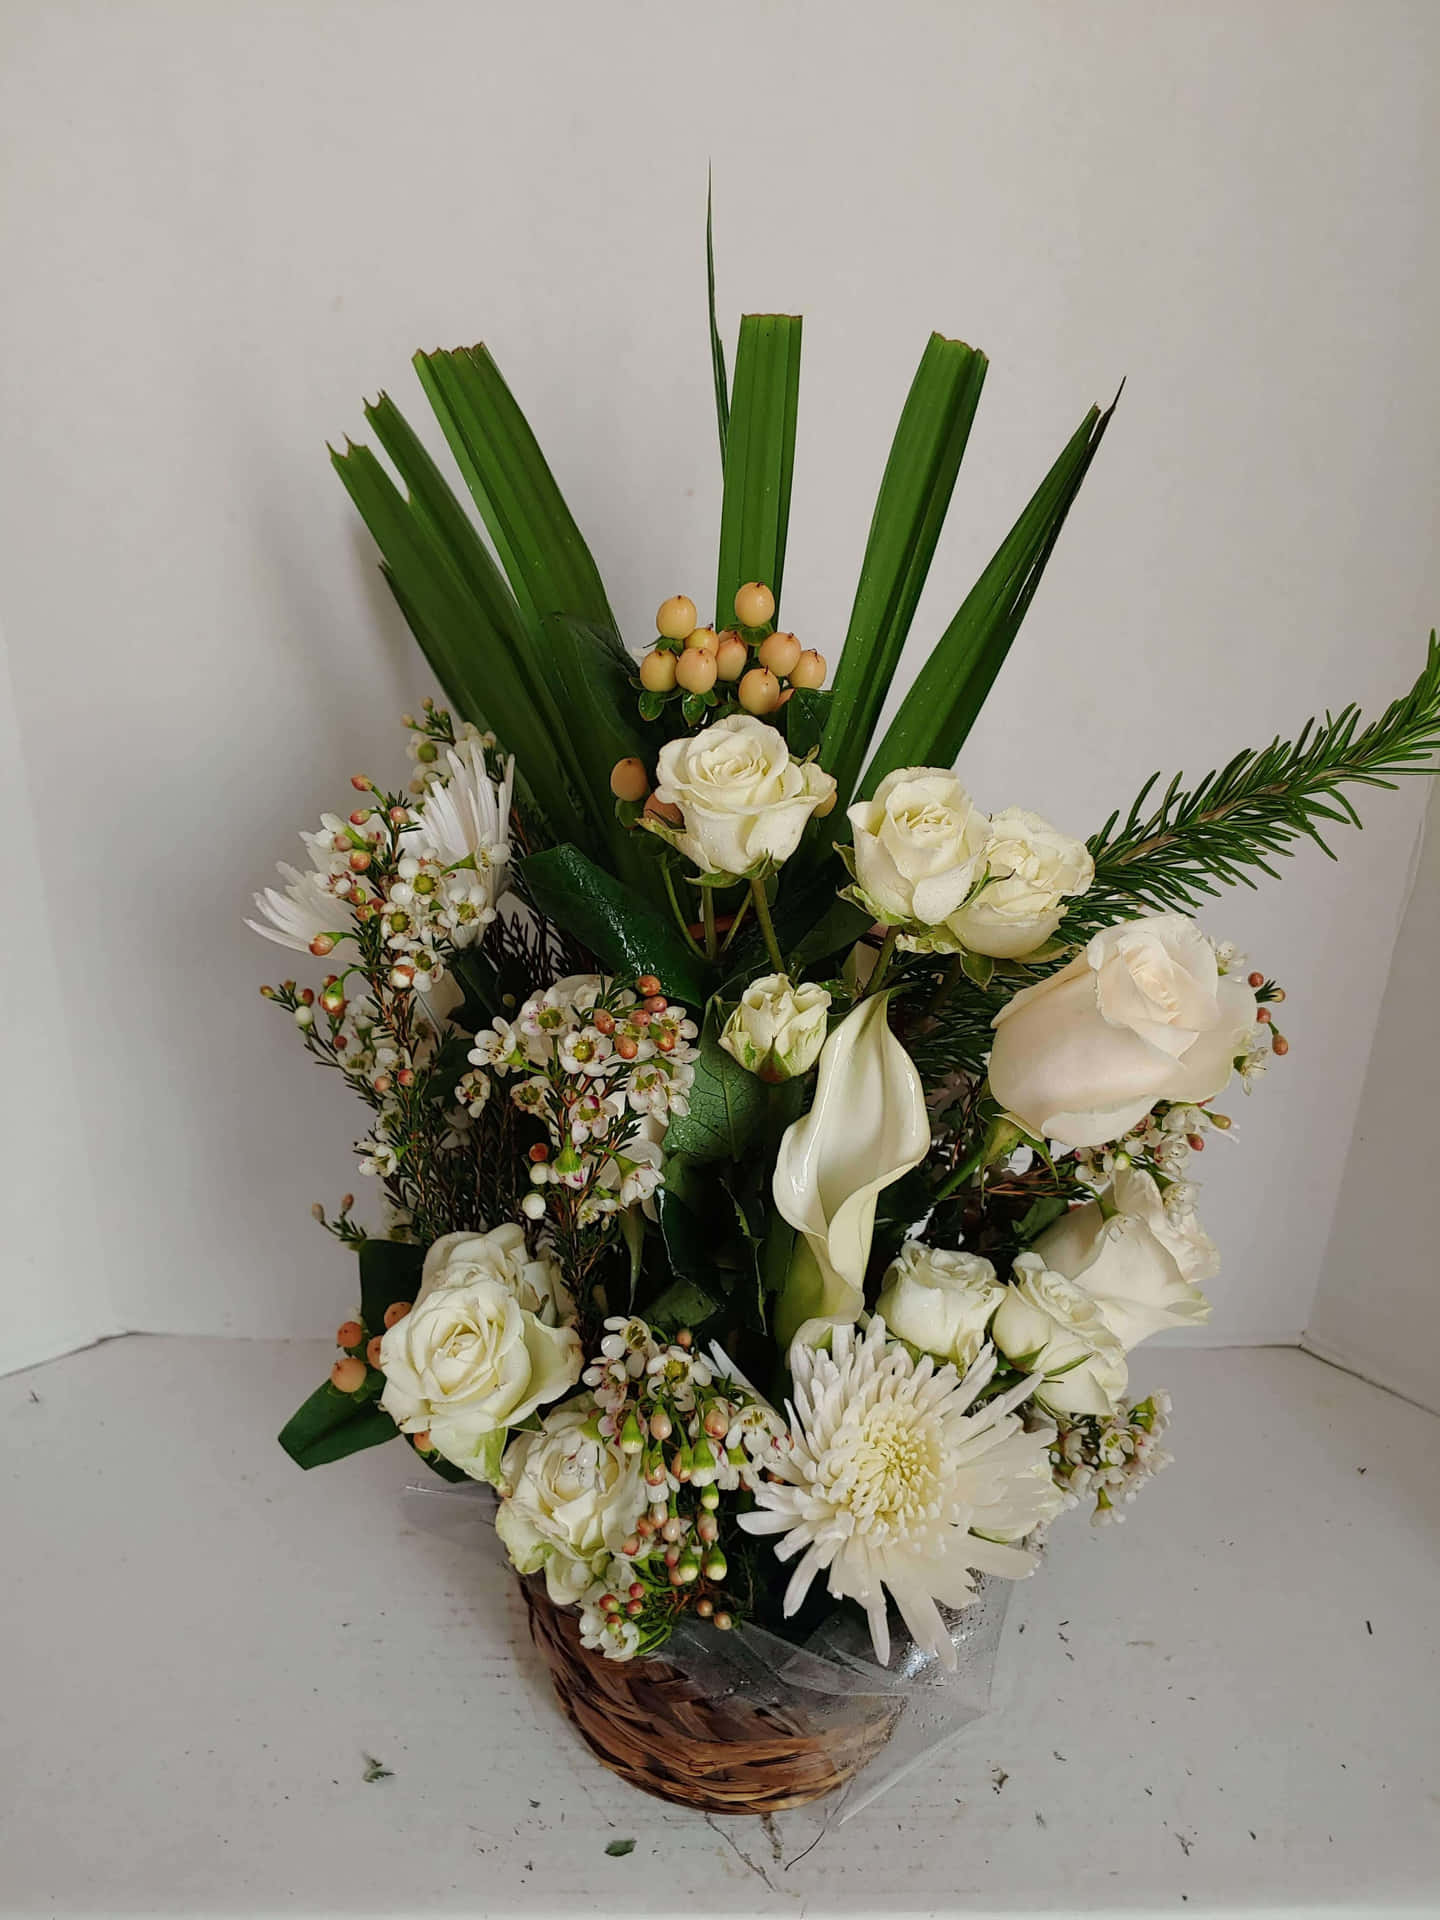 “Memorialize the Passed with Funeral Flower Arrangements”